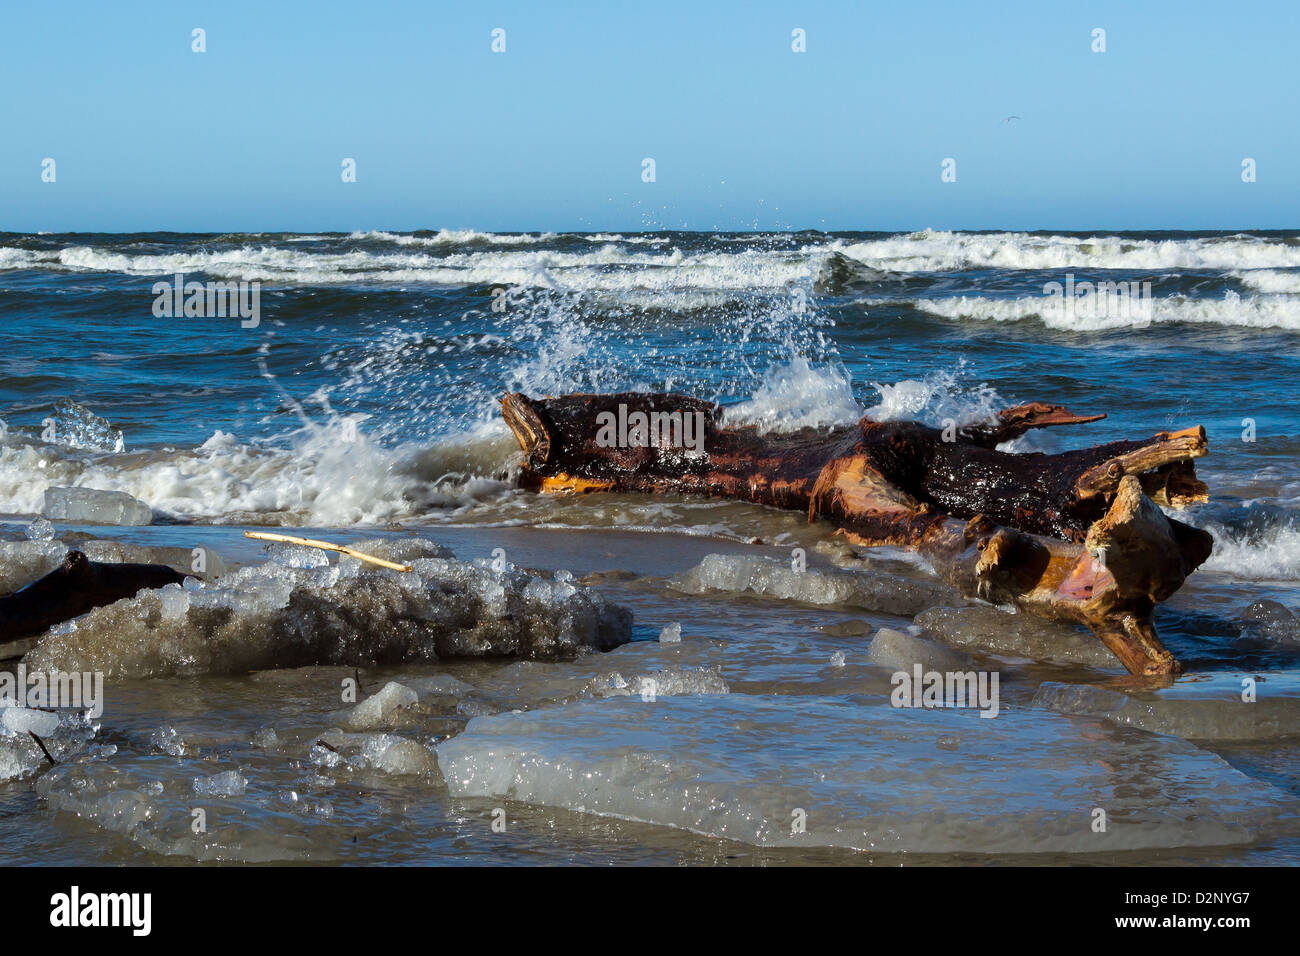 Splashing waves over a wood on the beach of Baltic sea. Stock Photo